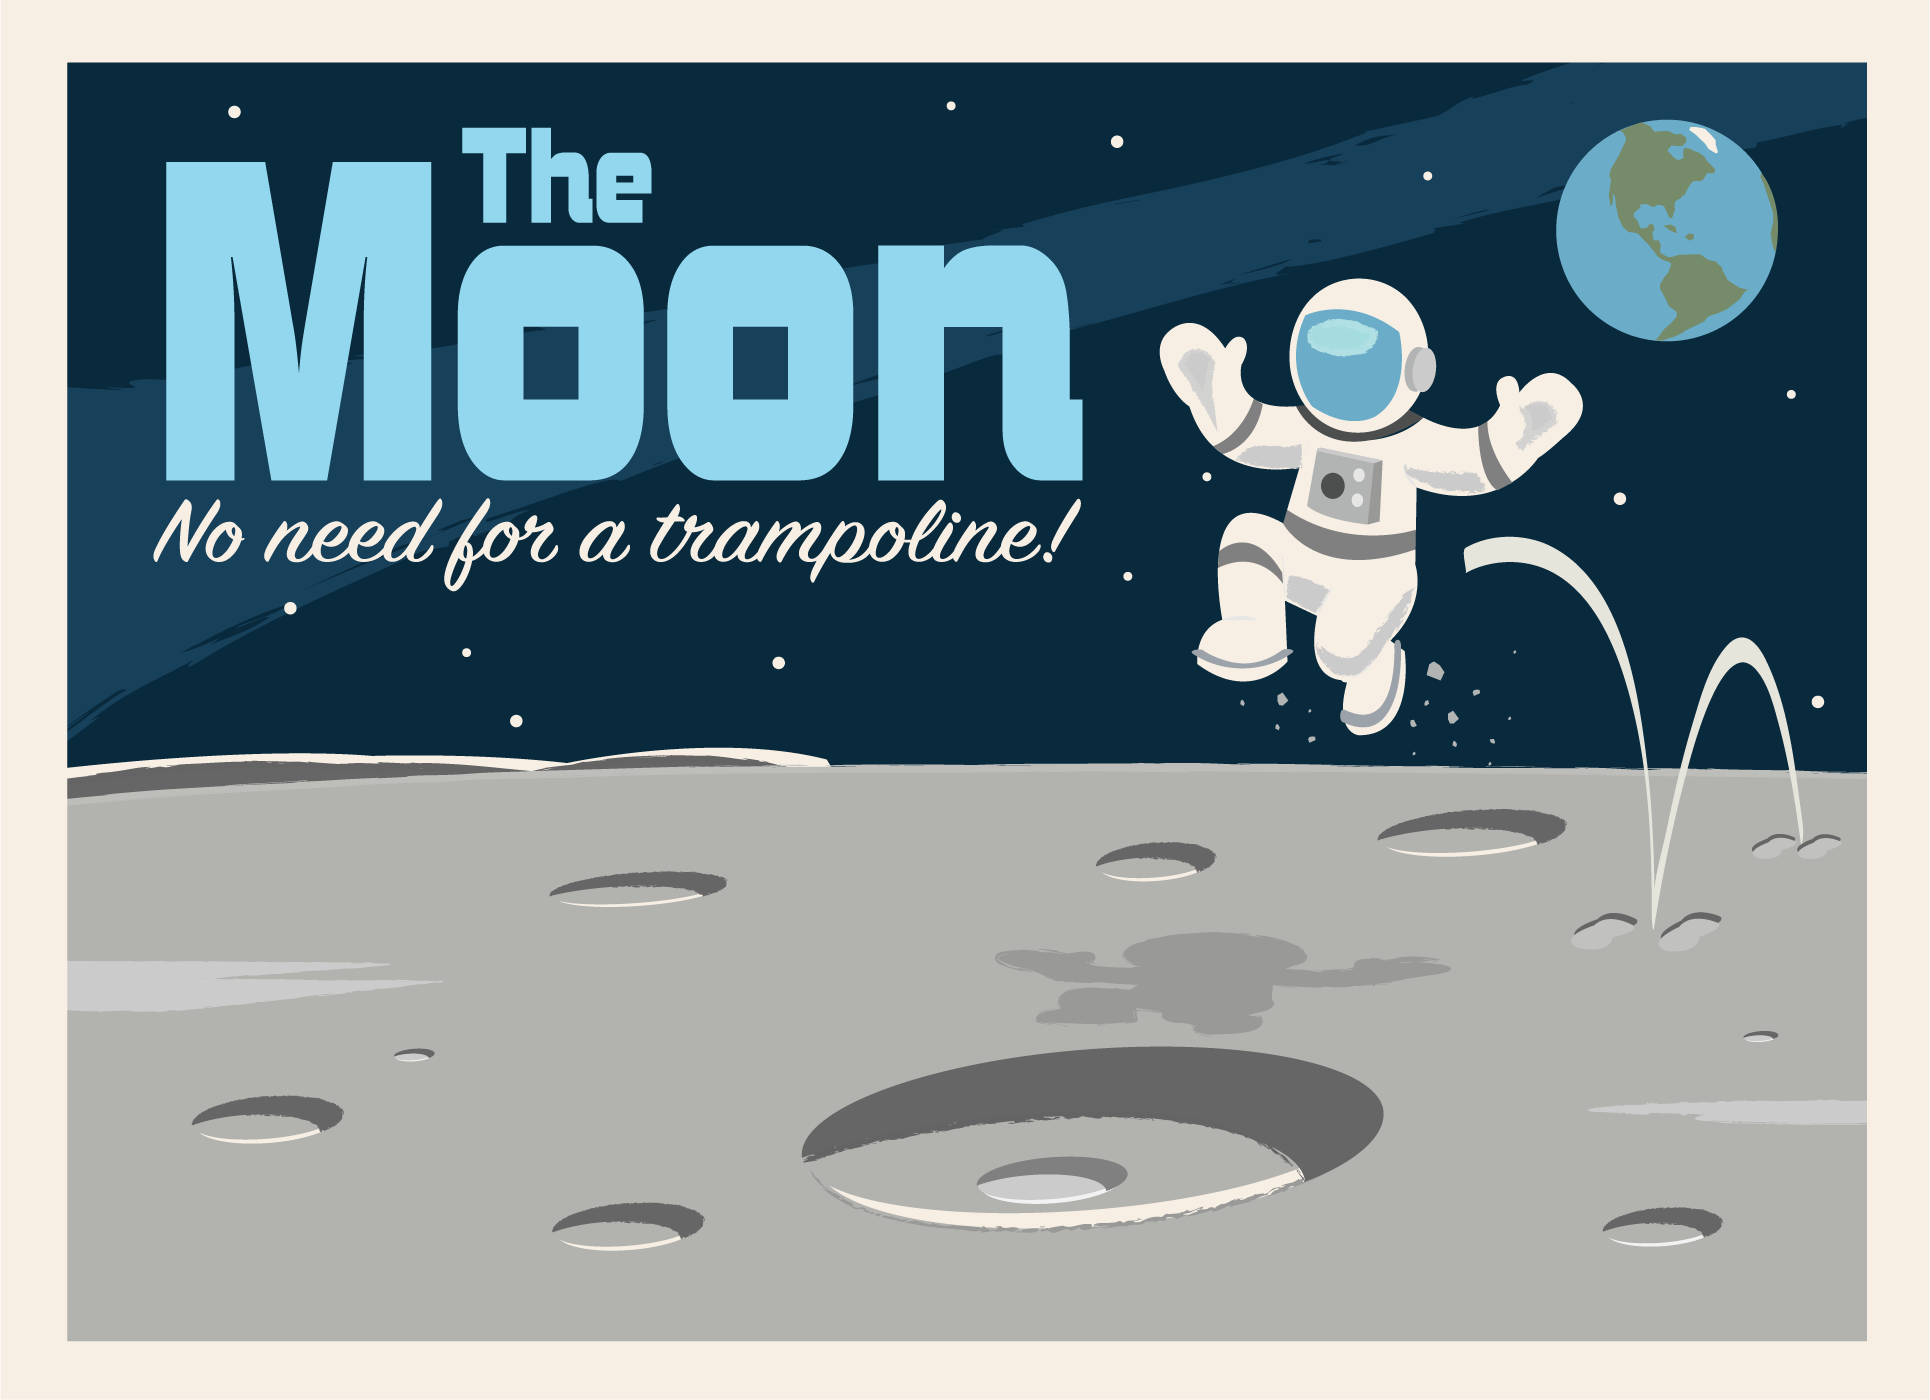 Postcard advertising travel to the Moon. The text on the postcard reads The Moon - No need for a trampoline! Behind the text is an illustration of an astronaut jumping on the surface of the Moon, with Earth visible in the distance.